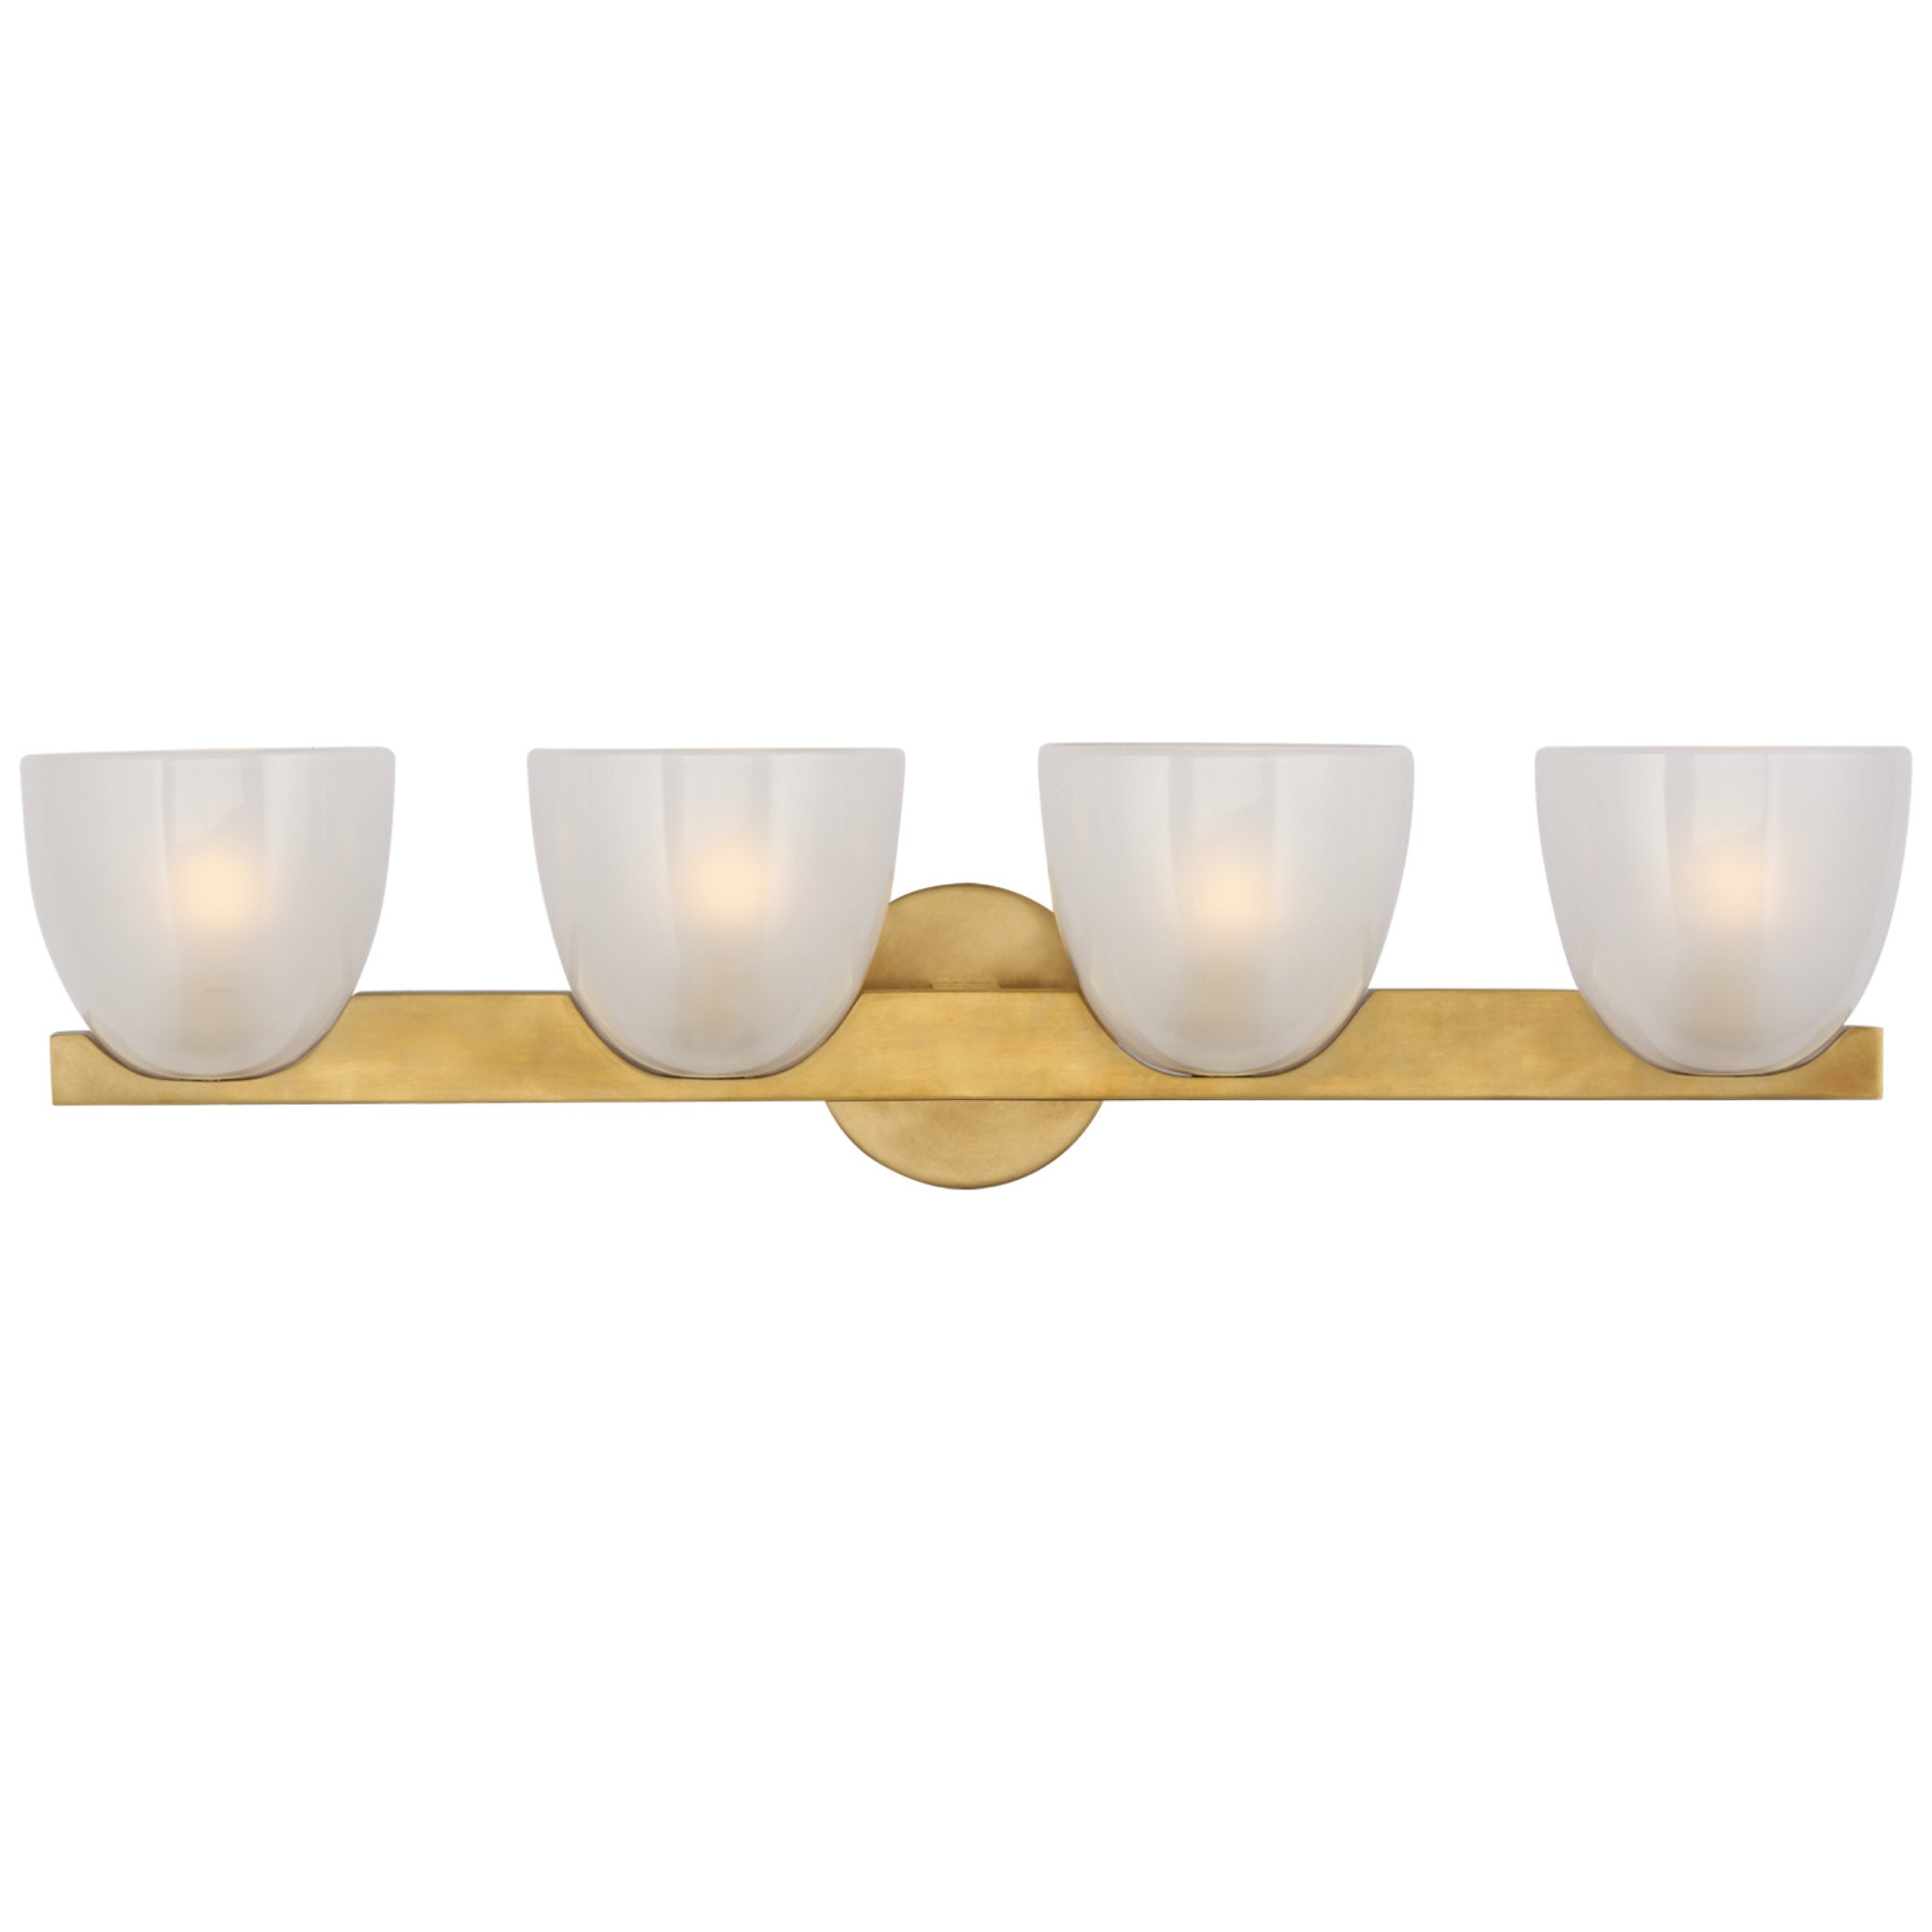 AERIN Carola 4-Light Bath Sconce in Hand-Rubbed Antique Brass with Frosted Glass